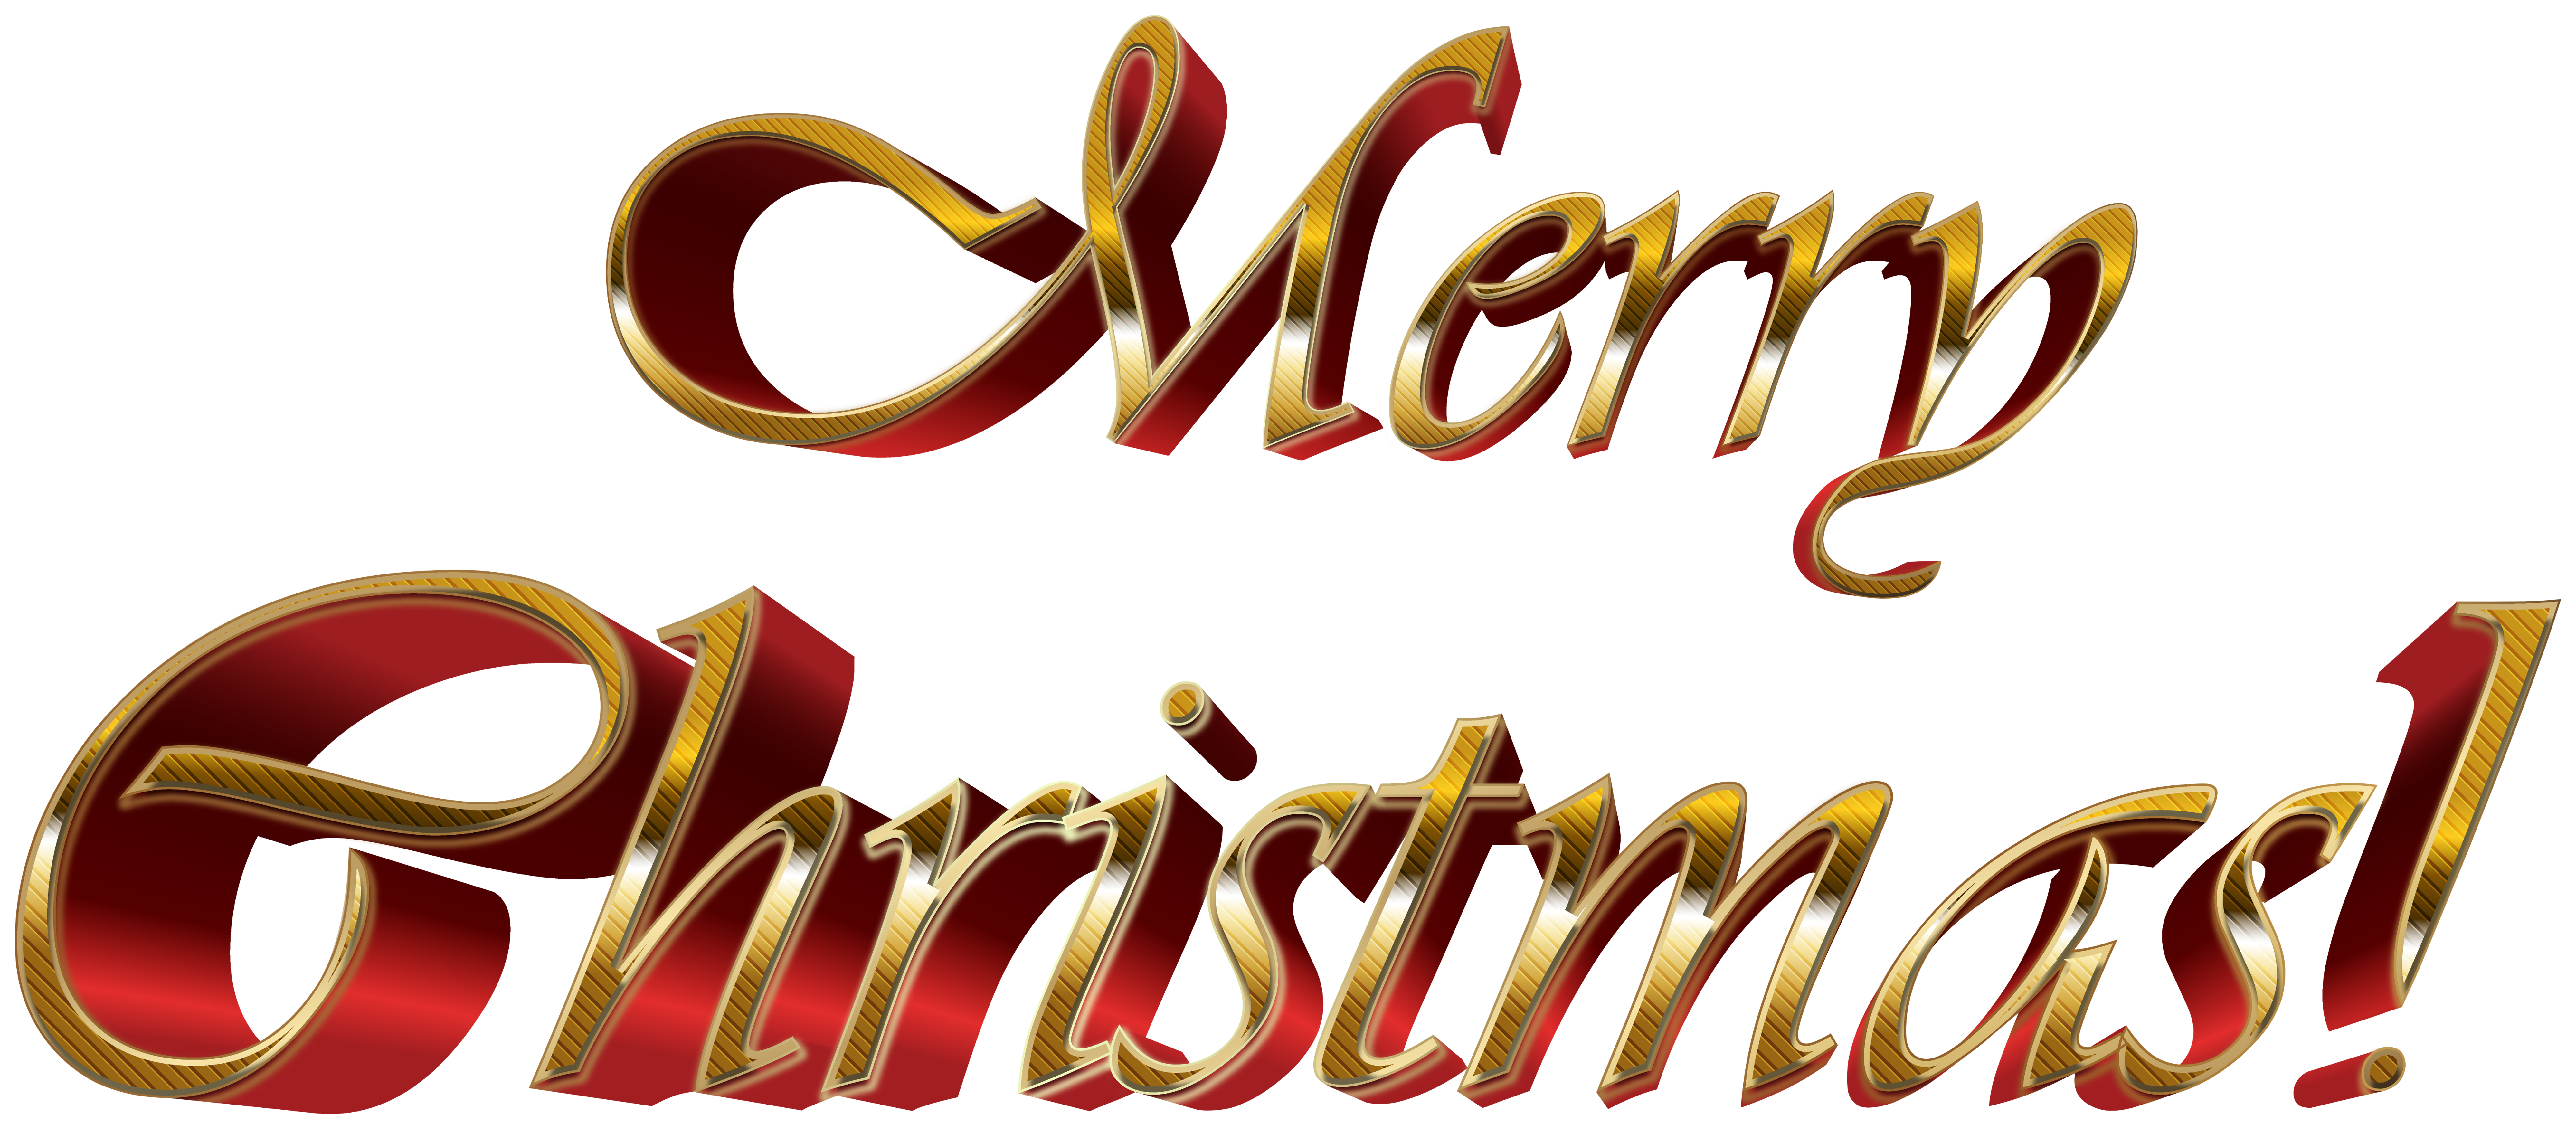 Merry Christmas Red Text PNG Clipart | Gallery ...
